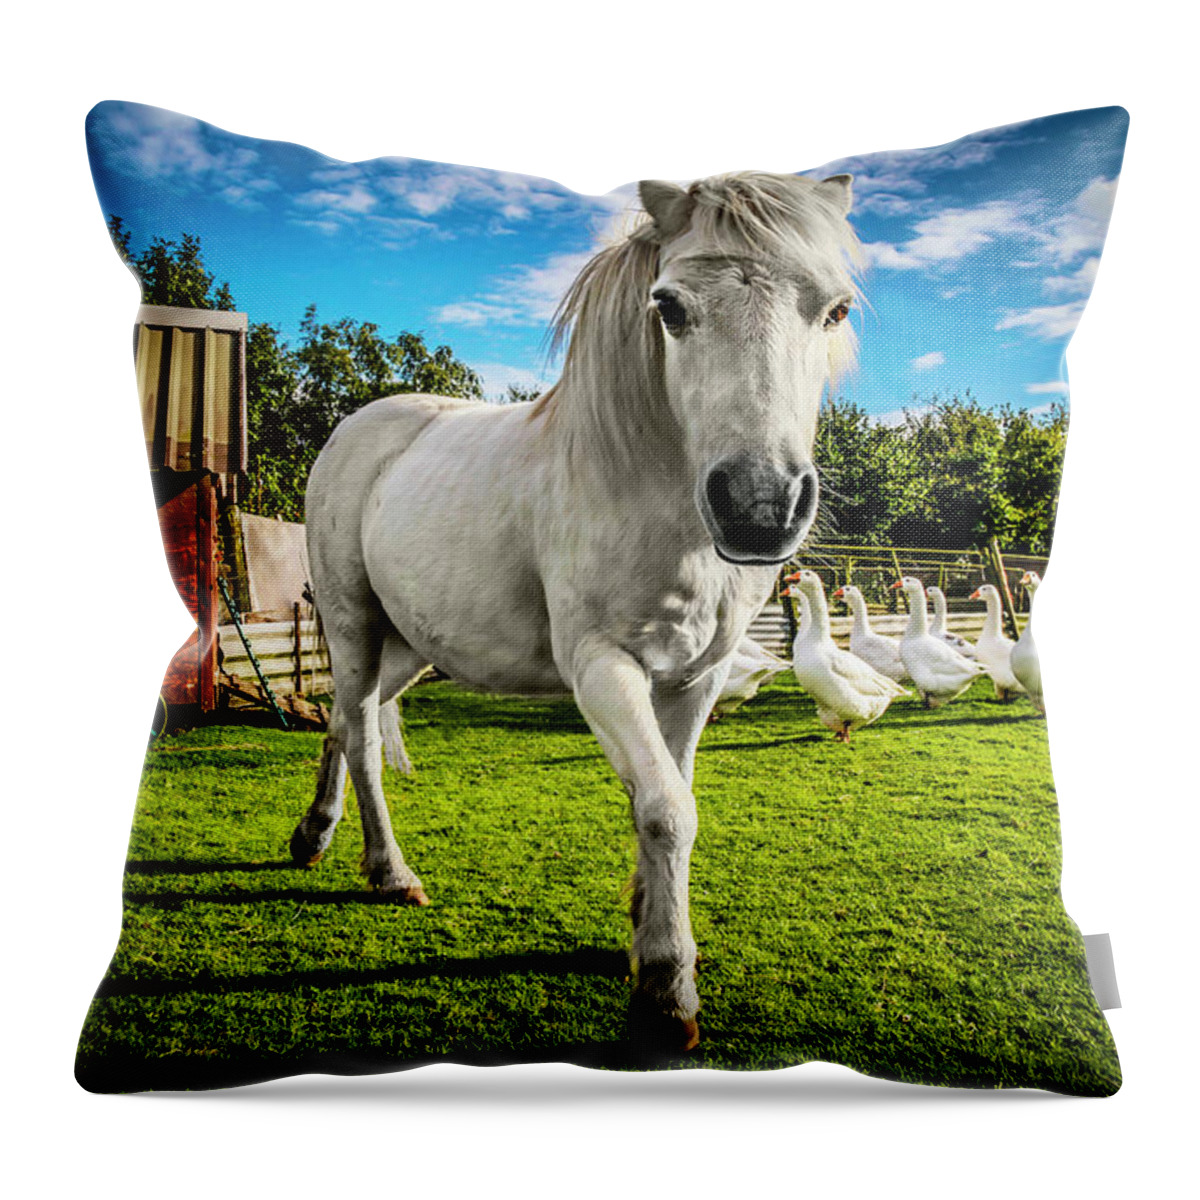 Horse White Pony Gypsy Camp Trailer Wagon Geese Grass Blue Sky Rural England Colorful Throw Pillow featuring the photograph English Gypsy Horse by Jennifer Wright